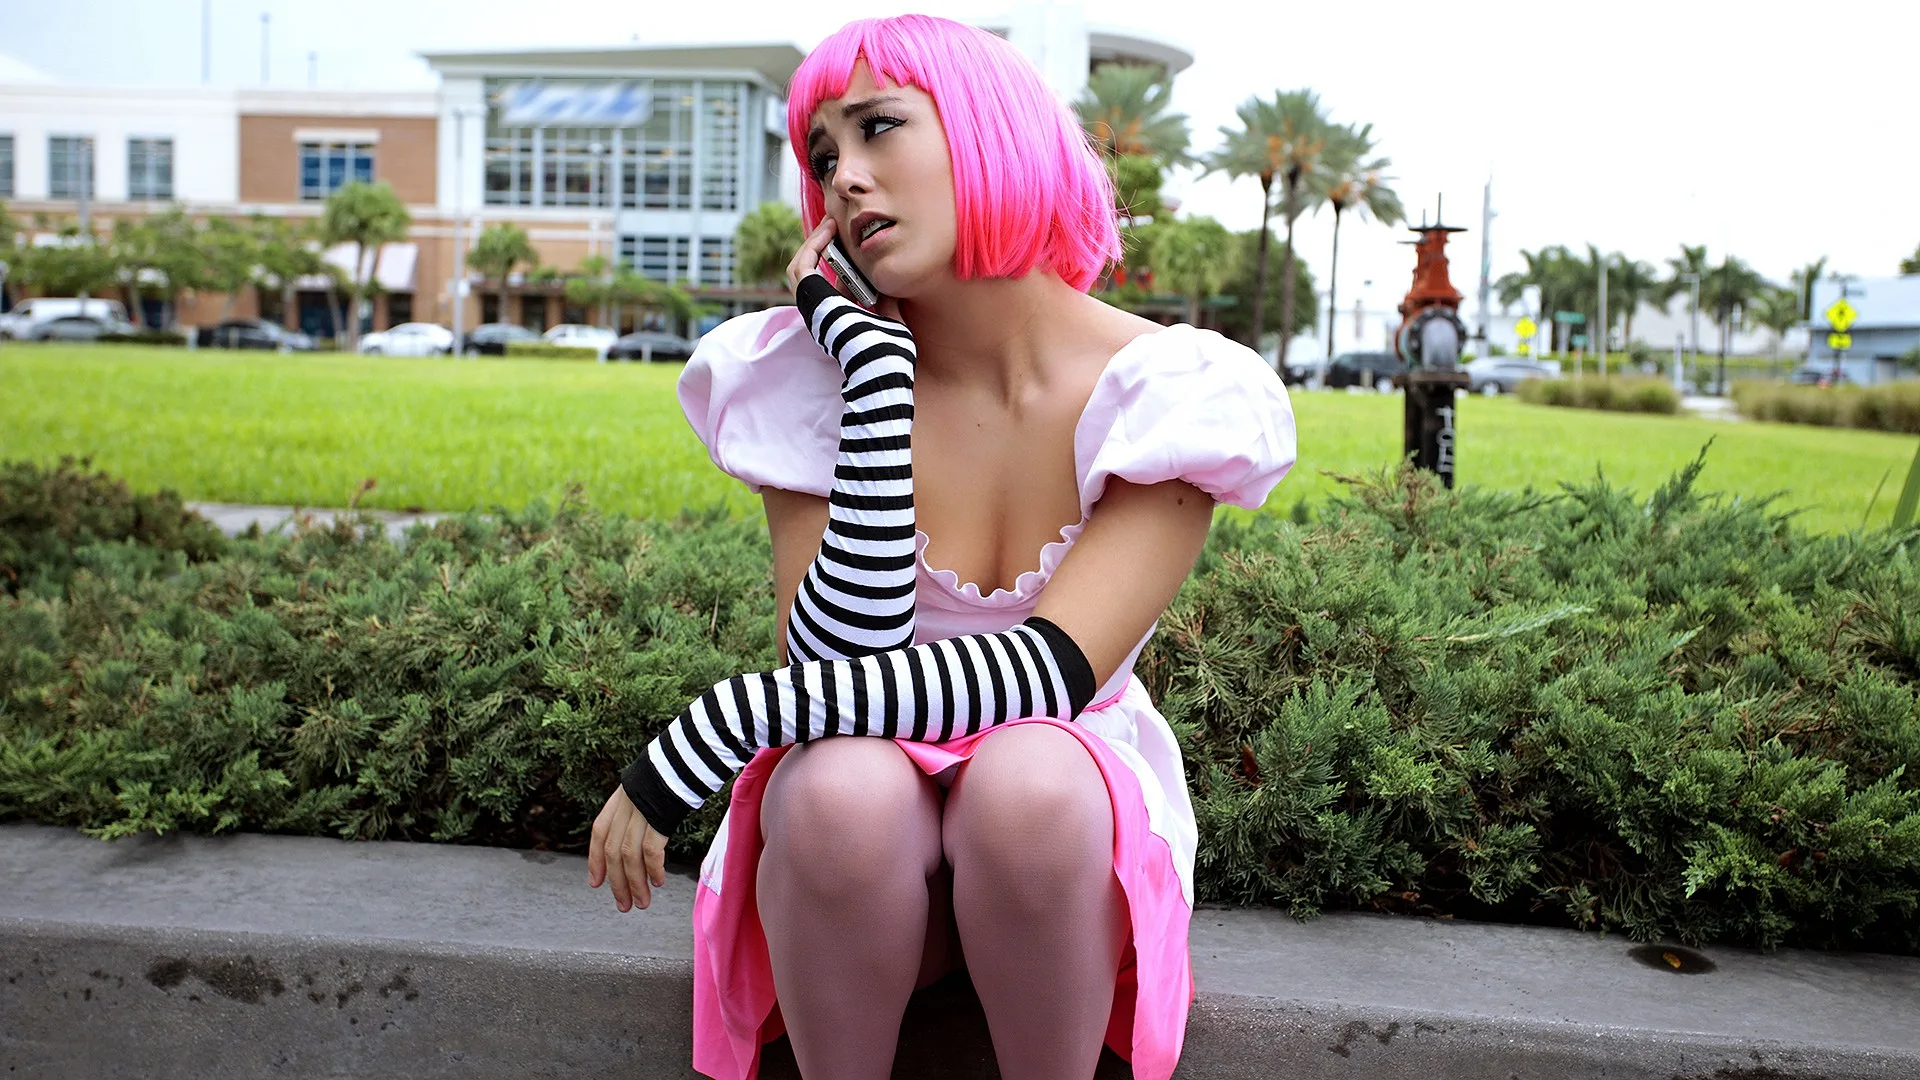 Cosplaying Chick Sucks Like a Pro - Stranded Teens